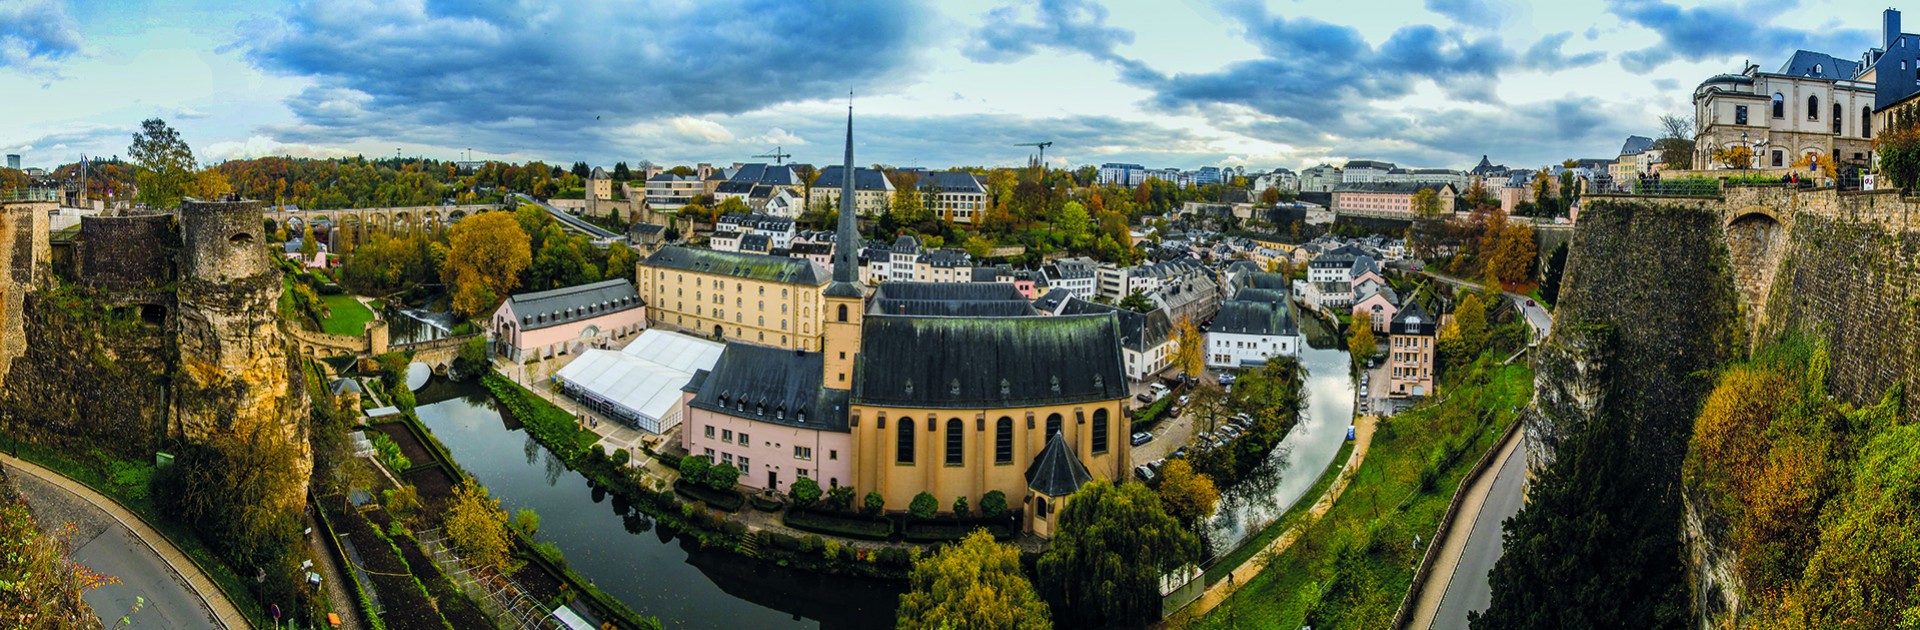 The City of Luxembourg - © Oleksii Liebiediev/shutterstock.com